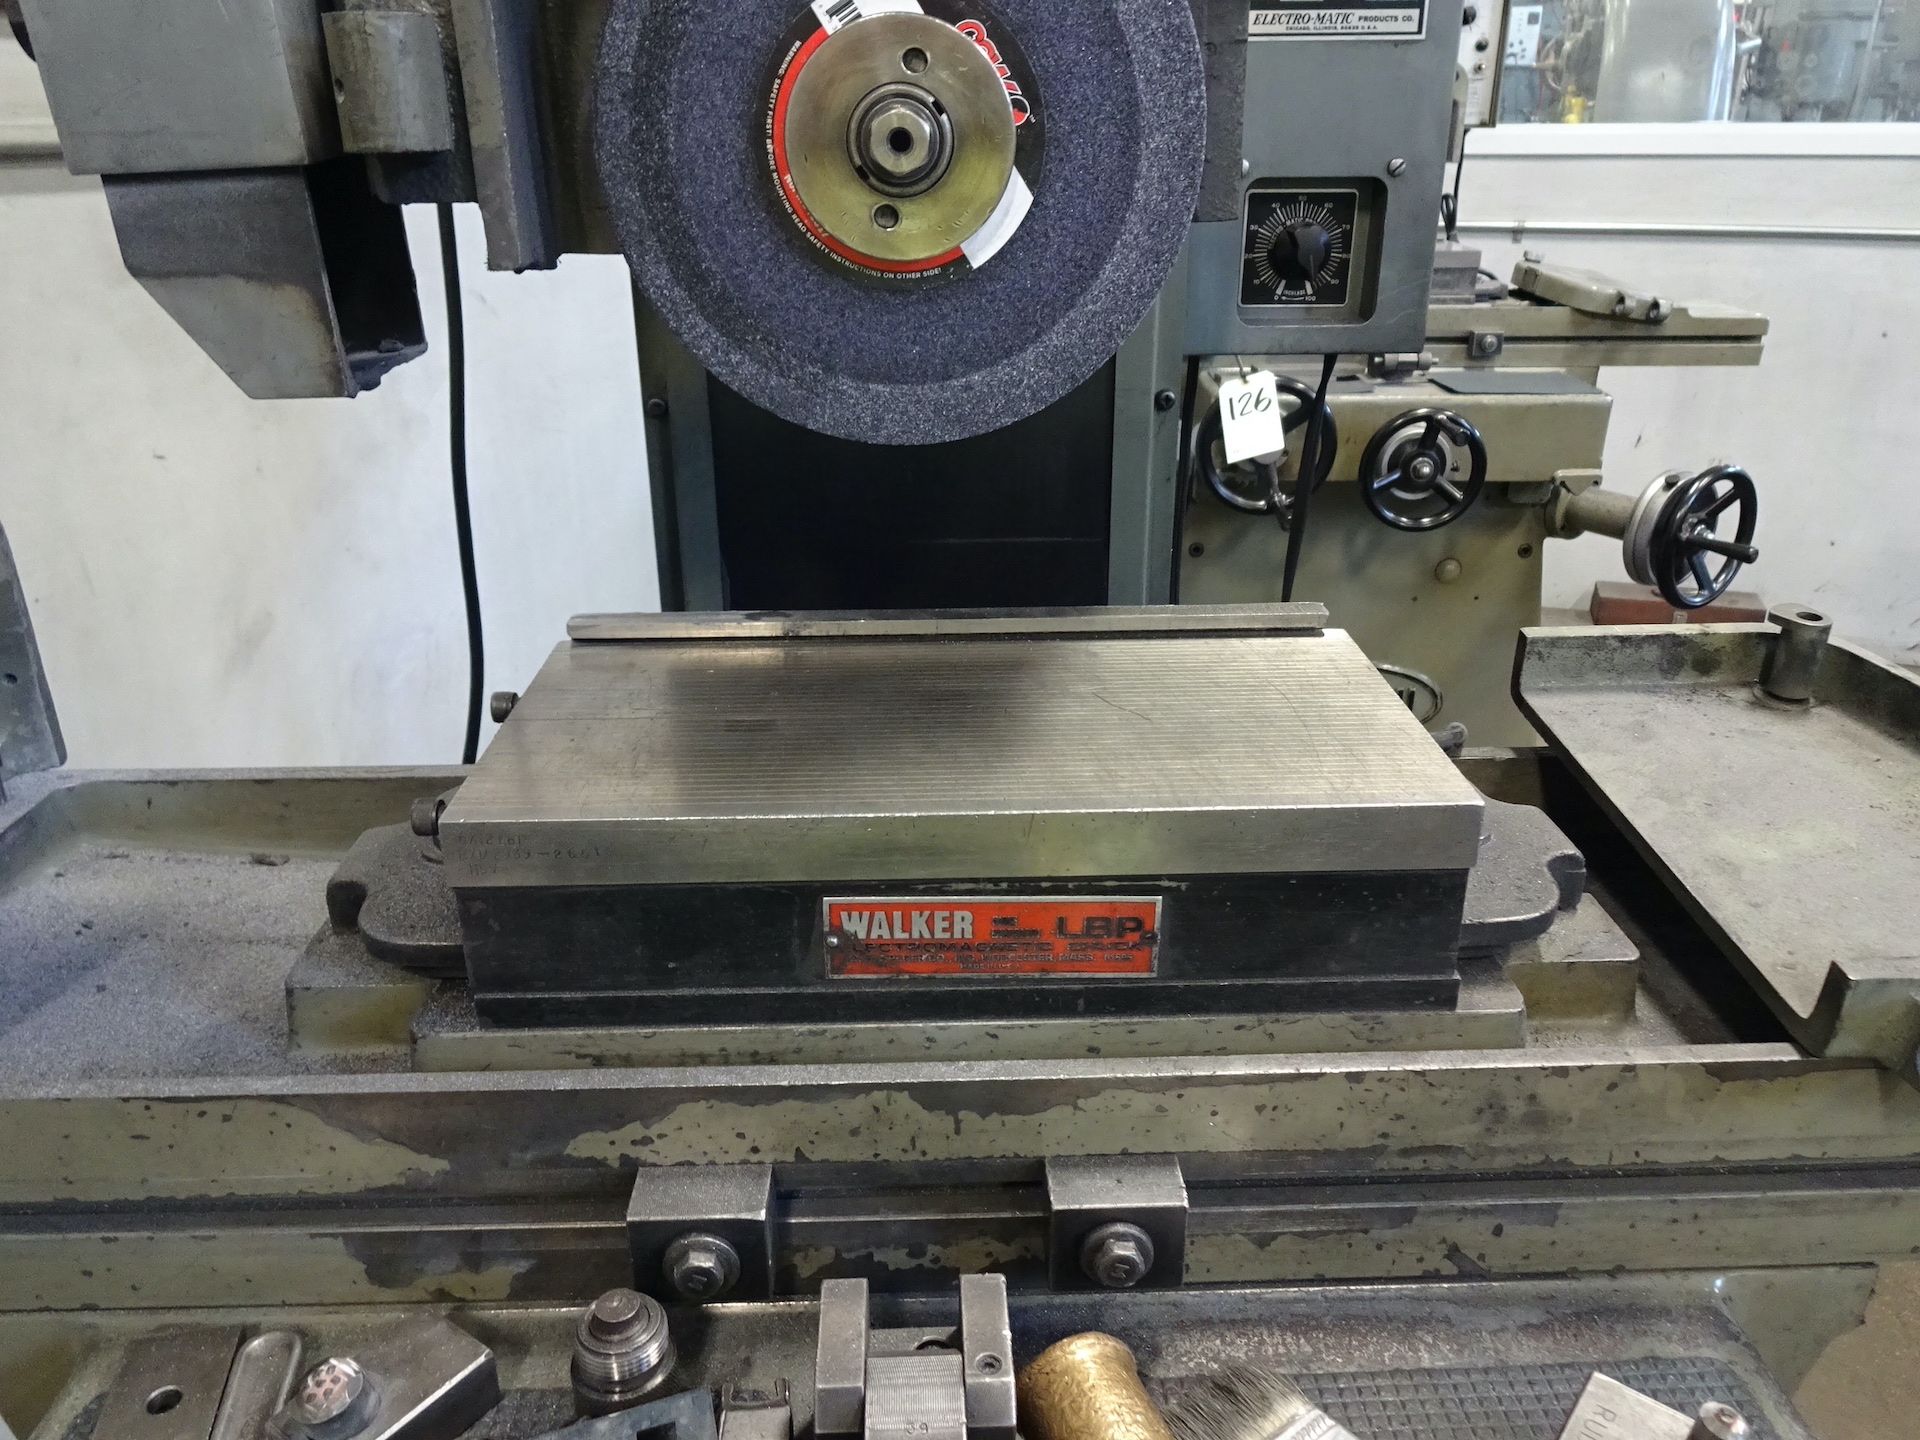 Mitsui 6 in. x 12 in. Model 200MH Hand Feed Surface Grinder, S/N 80022461 (1980), Walker Magnetic - Image 2 of 4